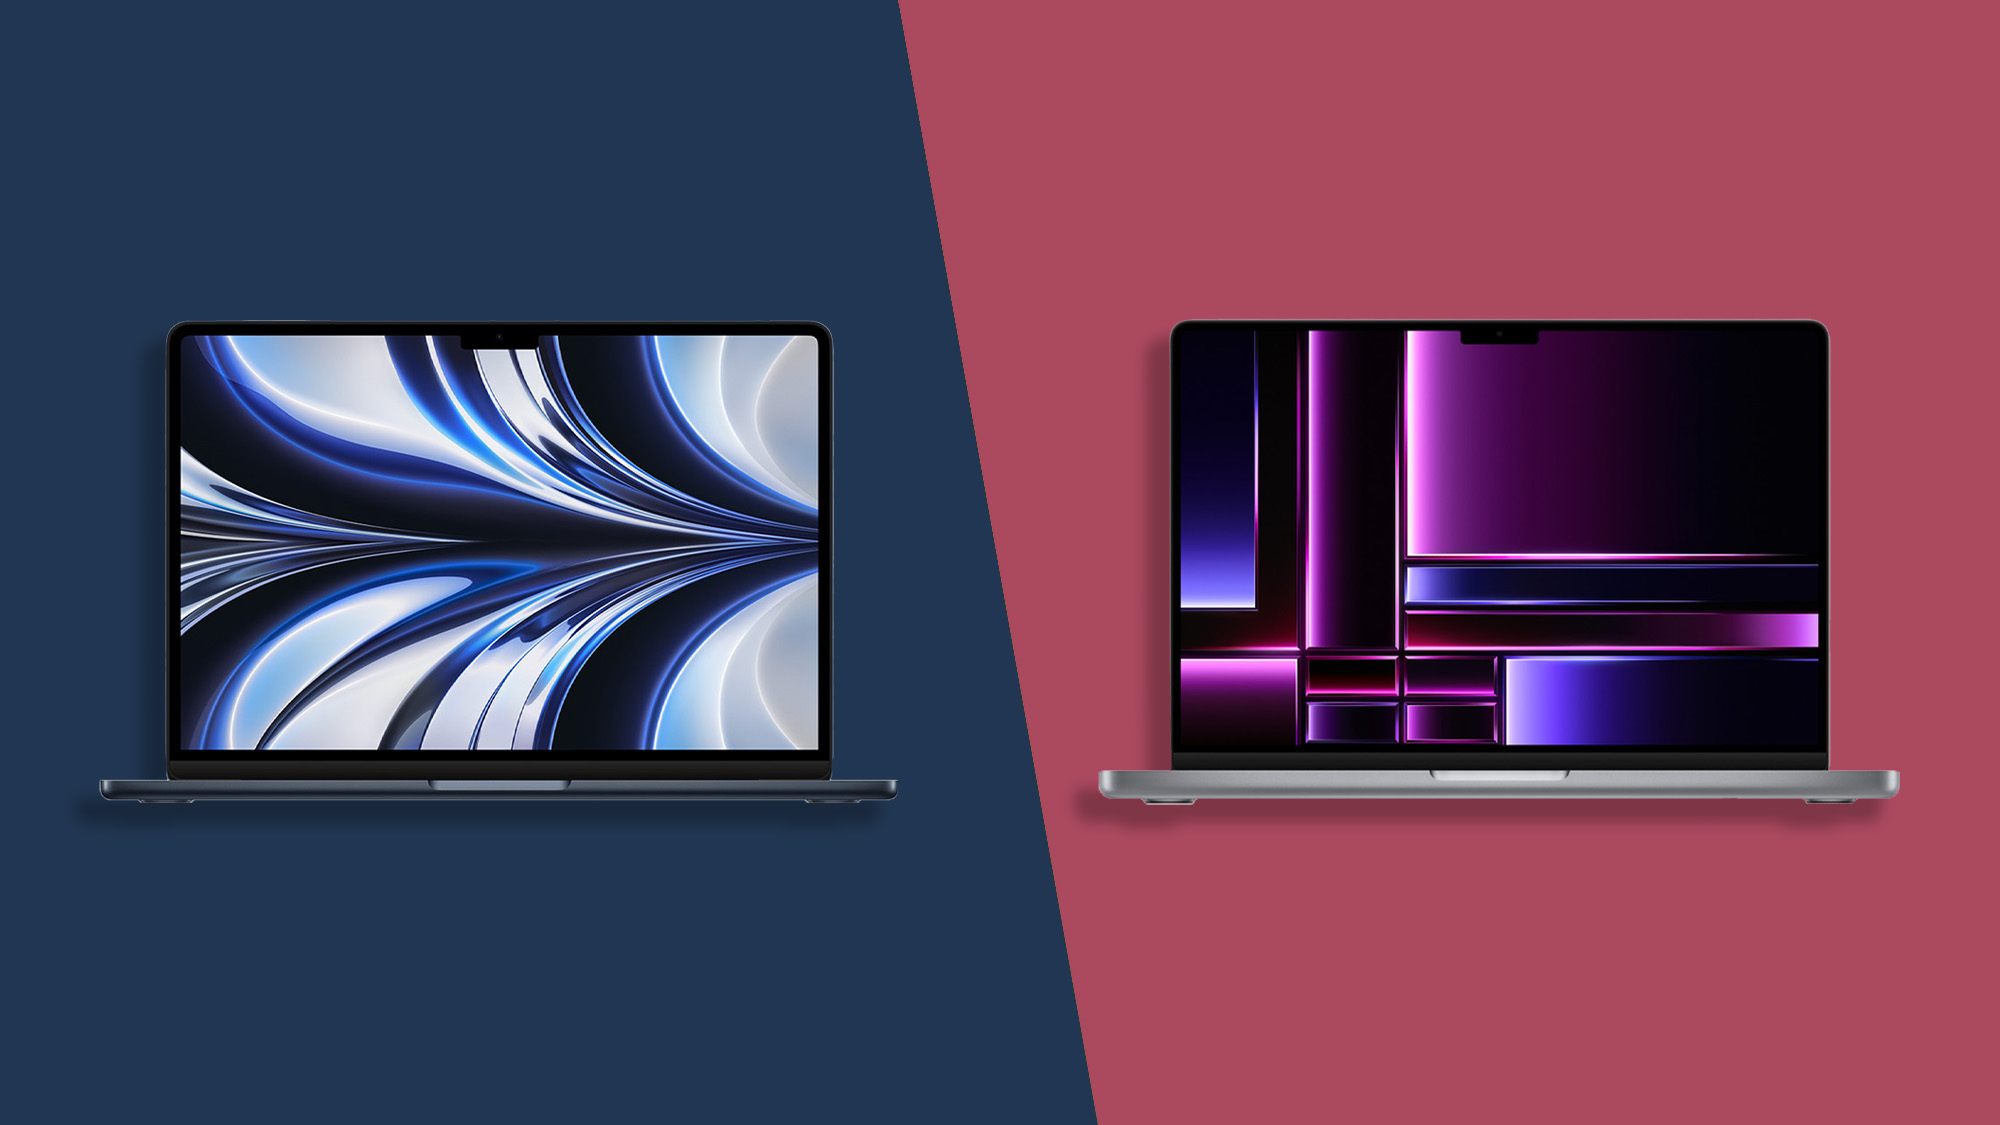 MacBook Air vs MacBook Pro we'll help you find which Mac portable is